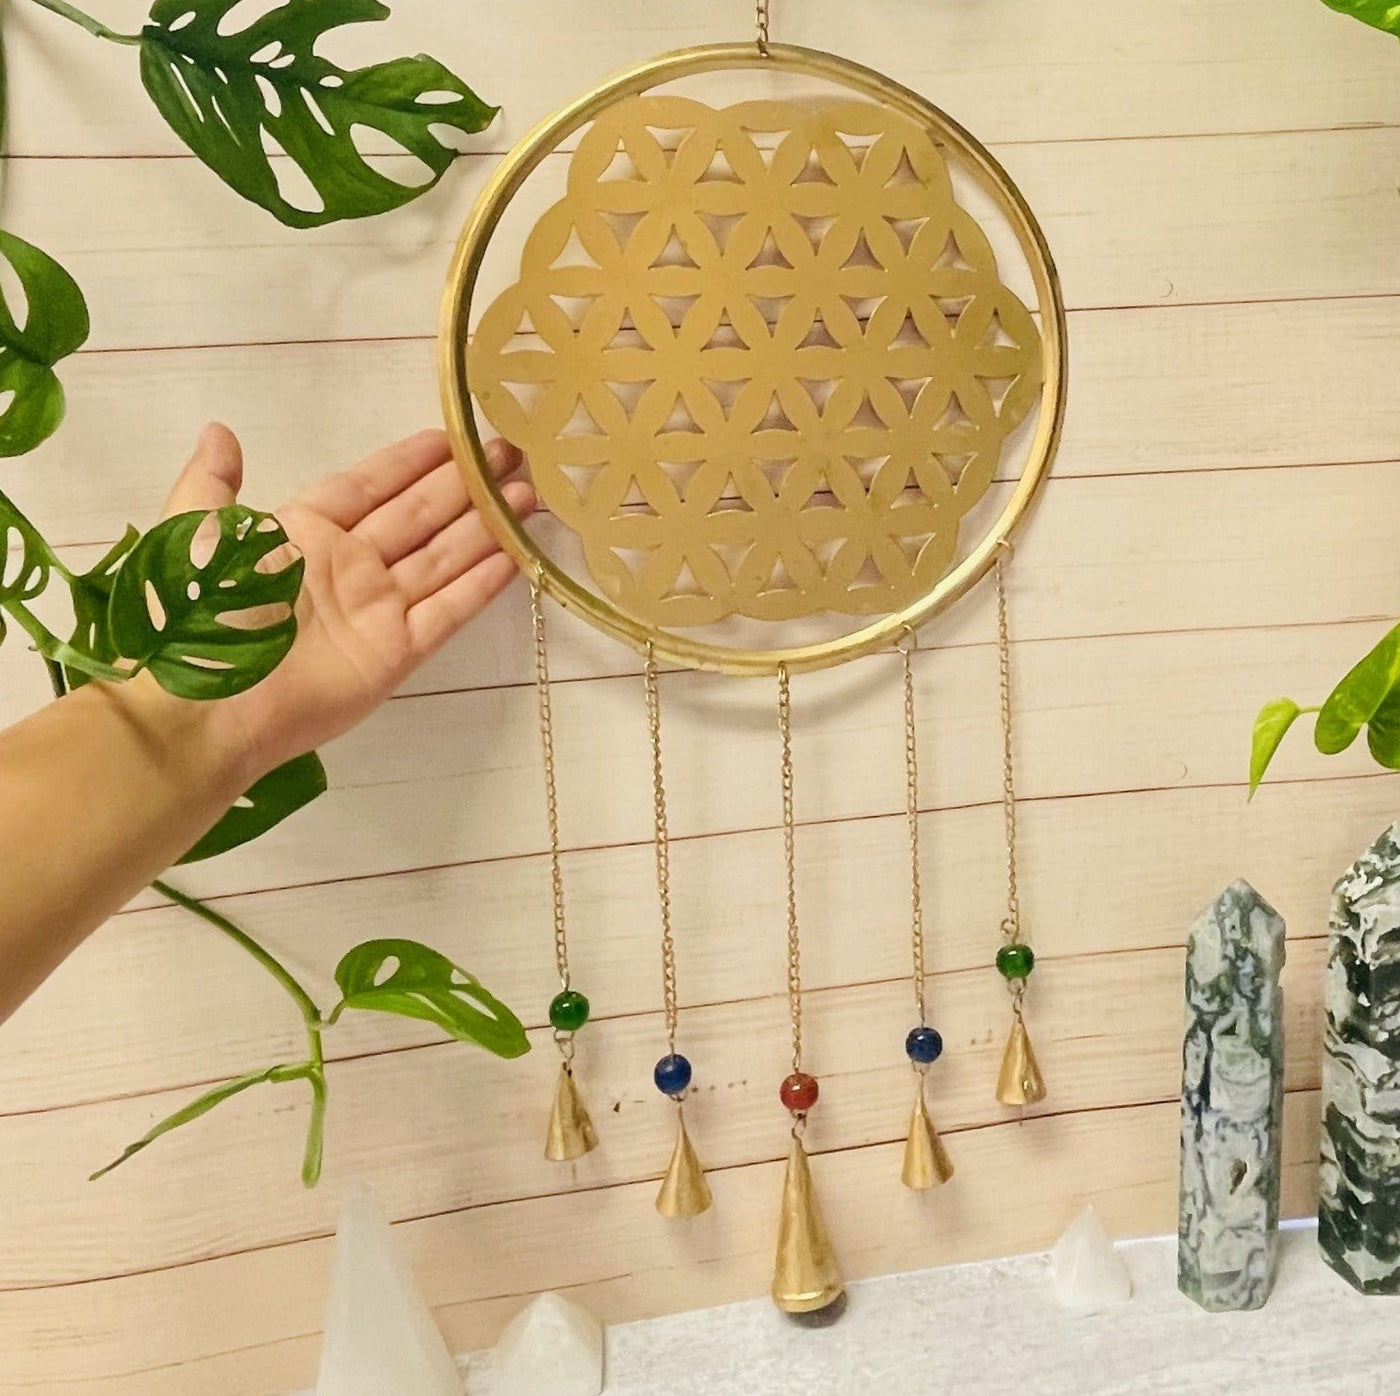 Brass Flower of Life wall Hanging - with a hand next to it